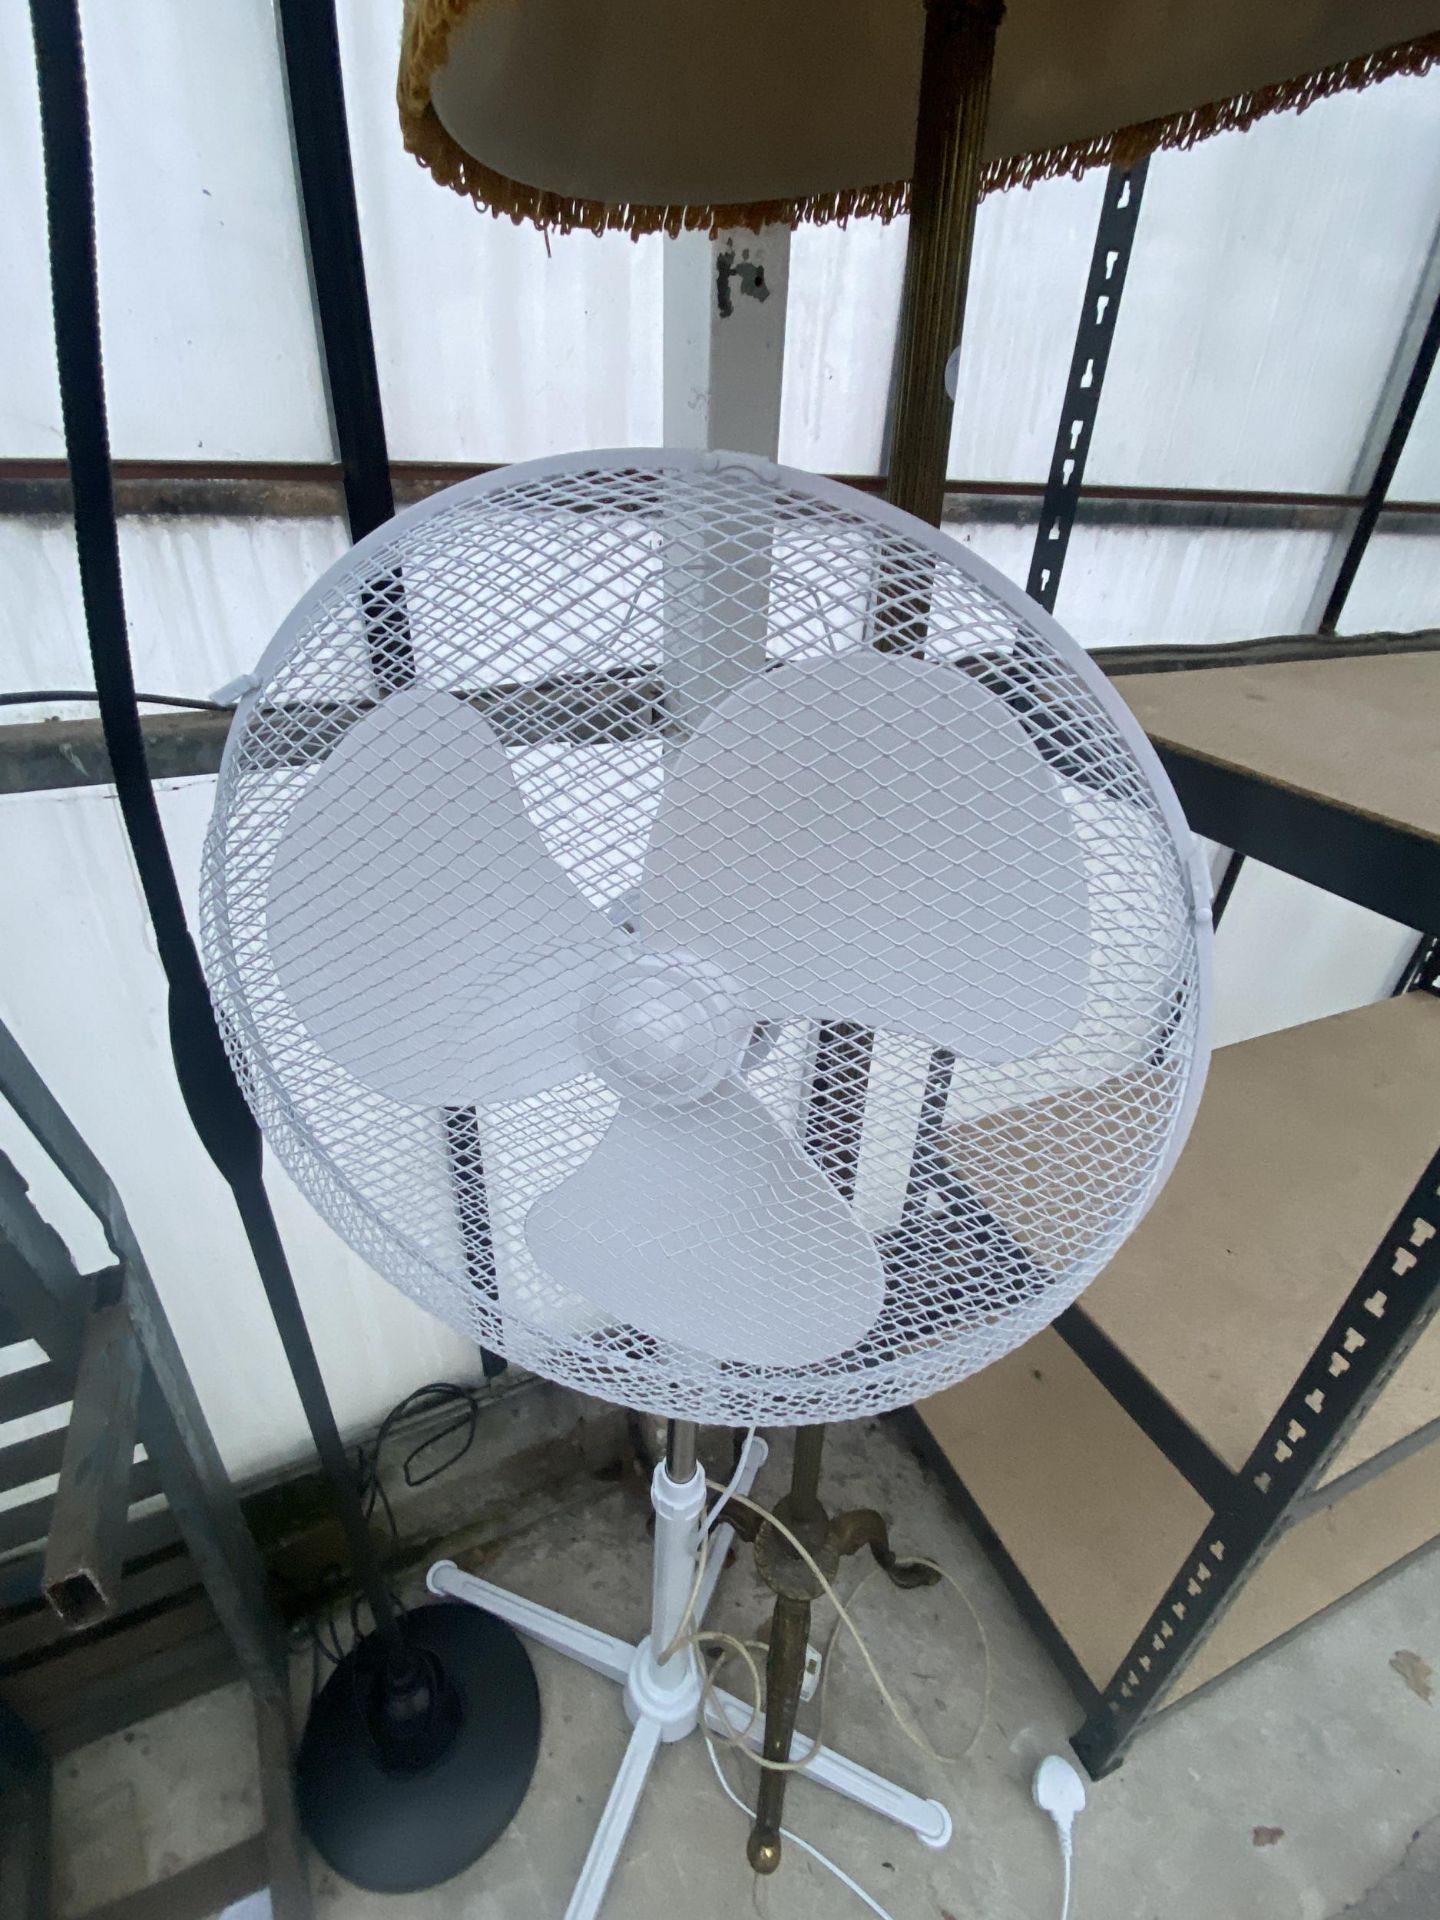 TWO STANDARD LAMPS AND A FLOOR FAN - Image 3 of 3